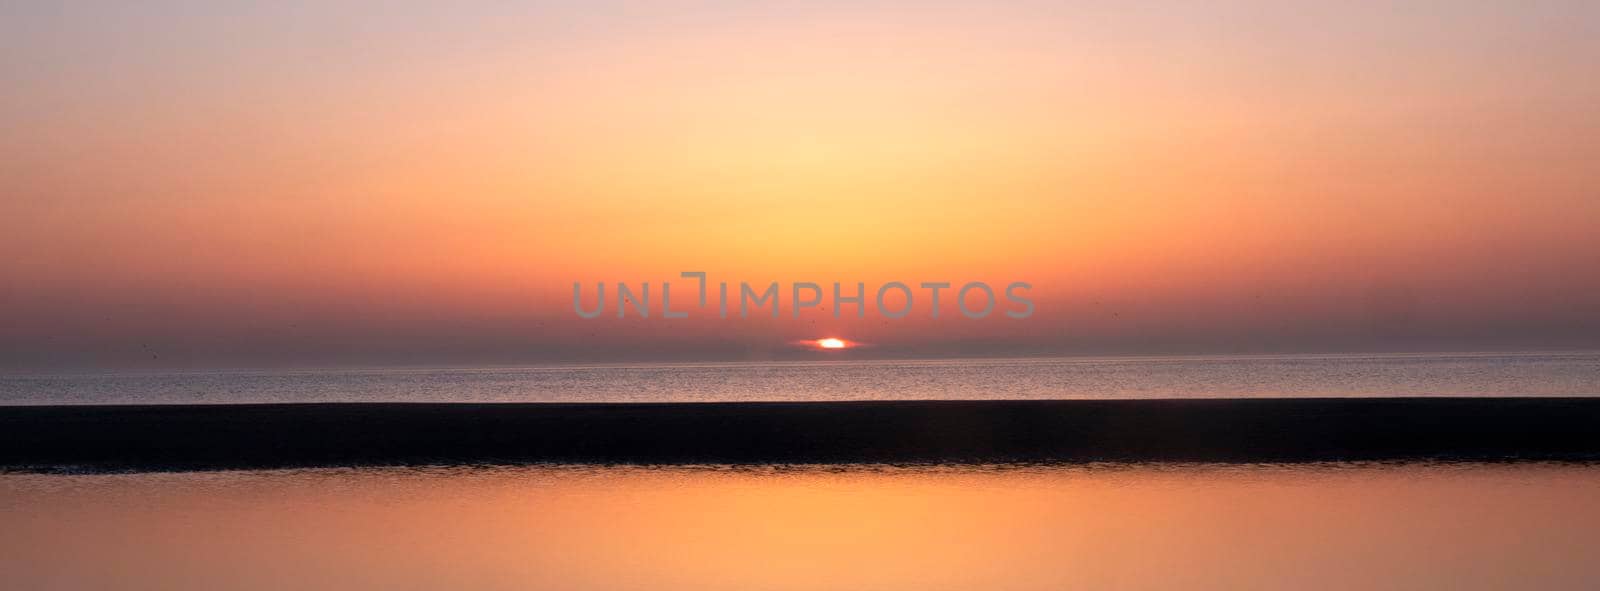 reflection of colorful sunset in water near beach by ahavelaar